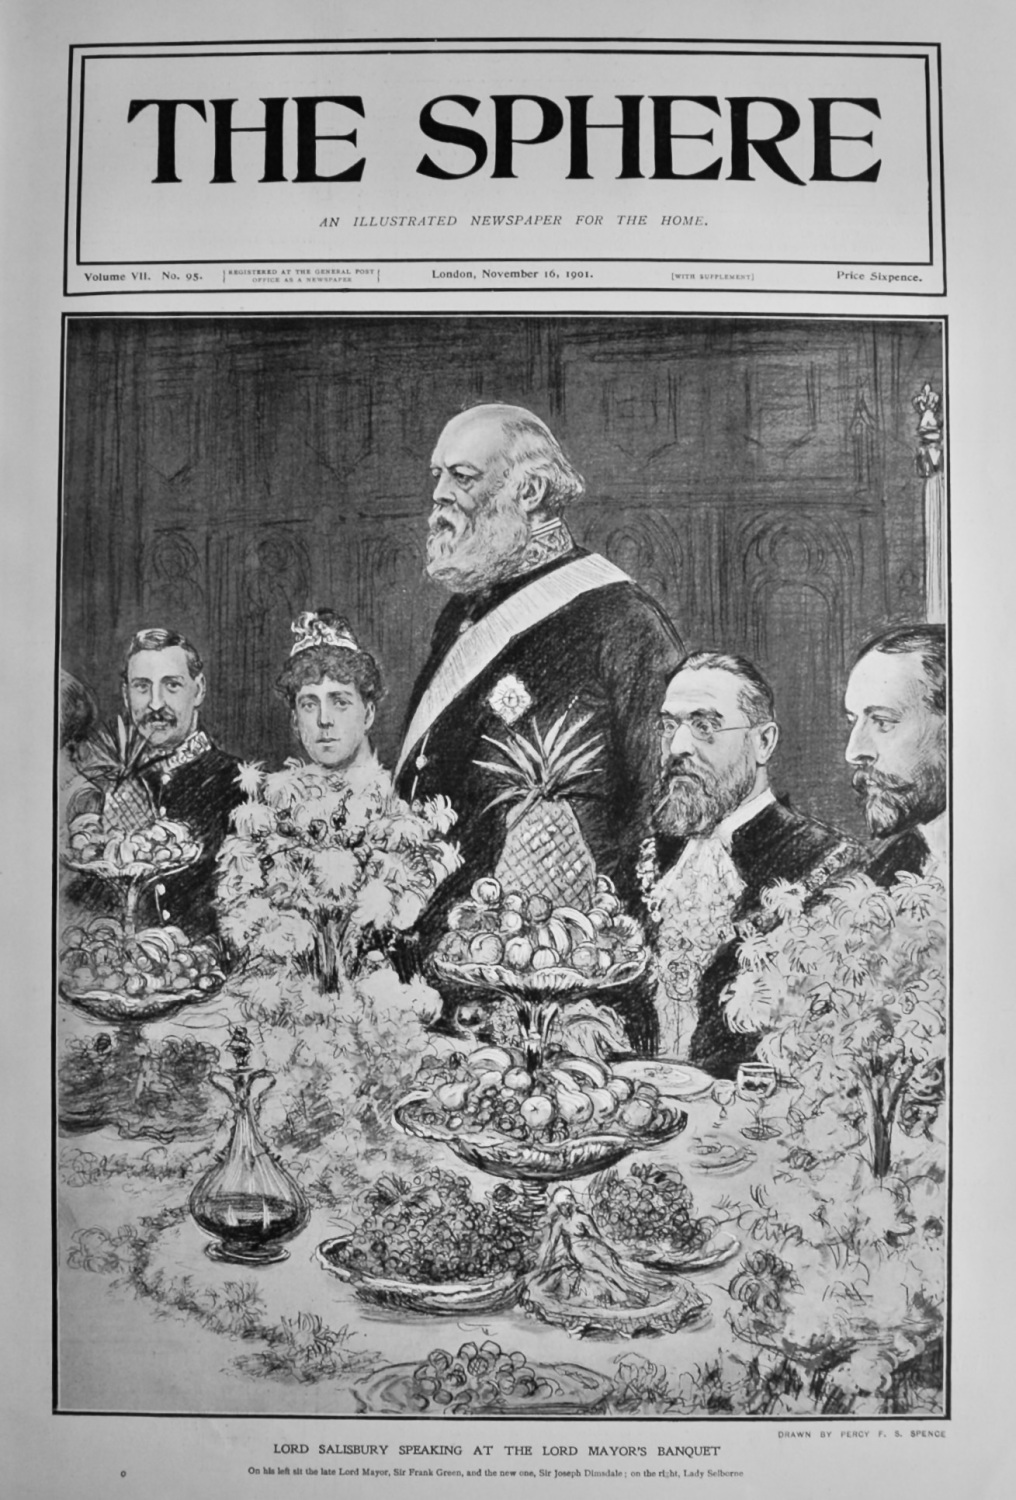 Lord Salisbury Speaking at the Lord Mayor's Banquet.  1901.